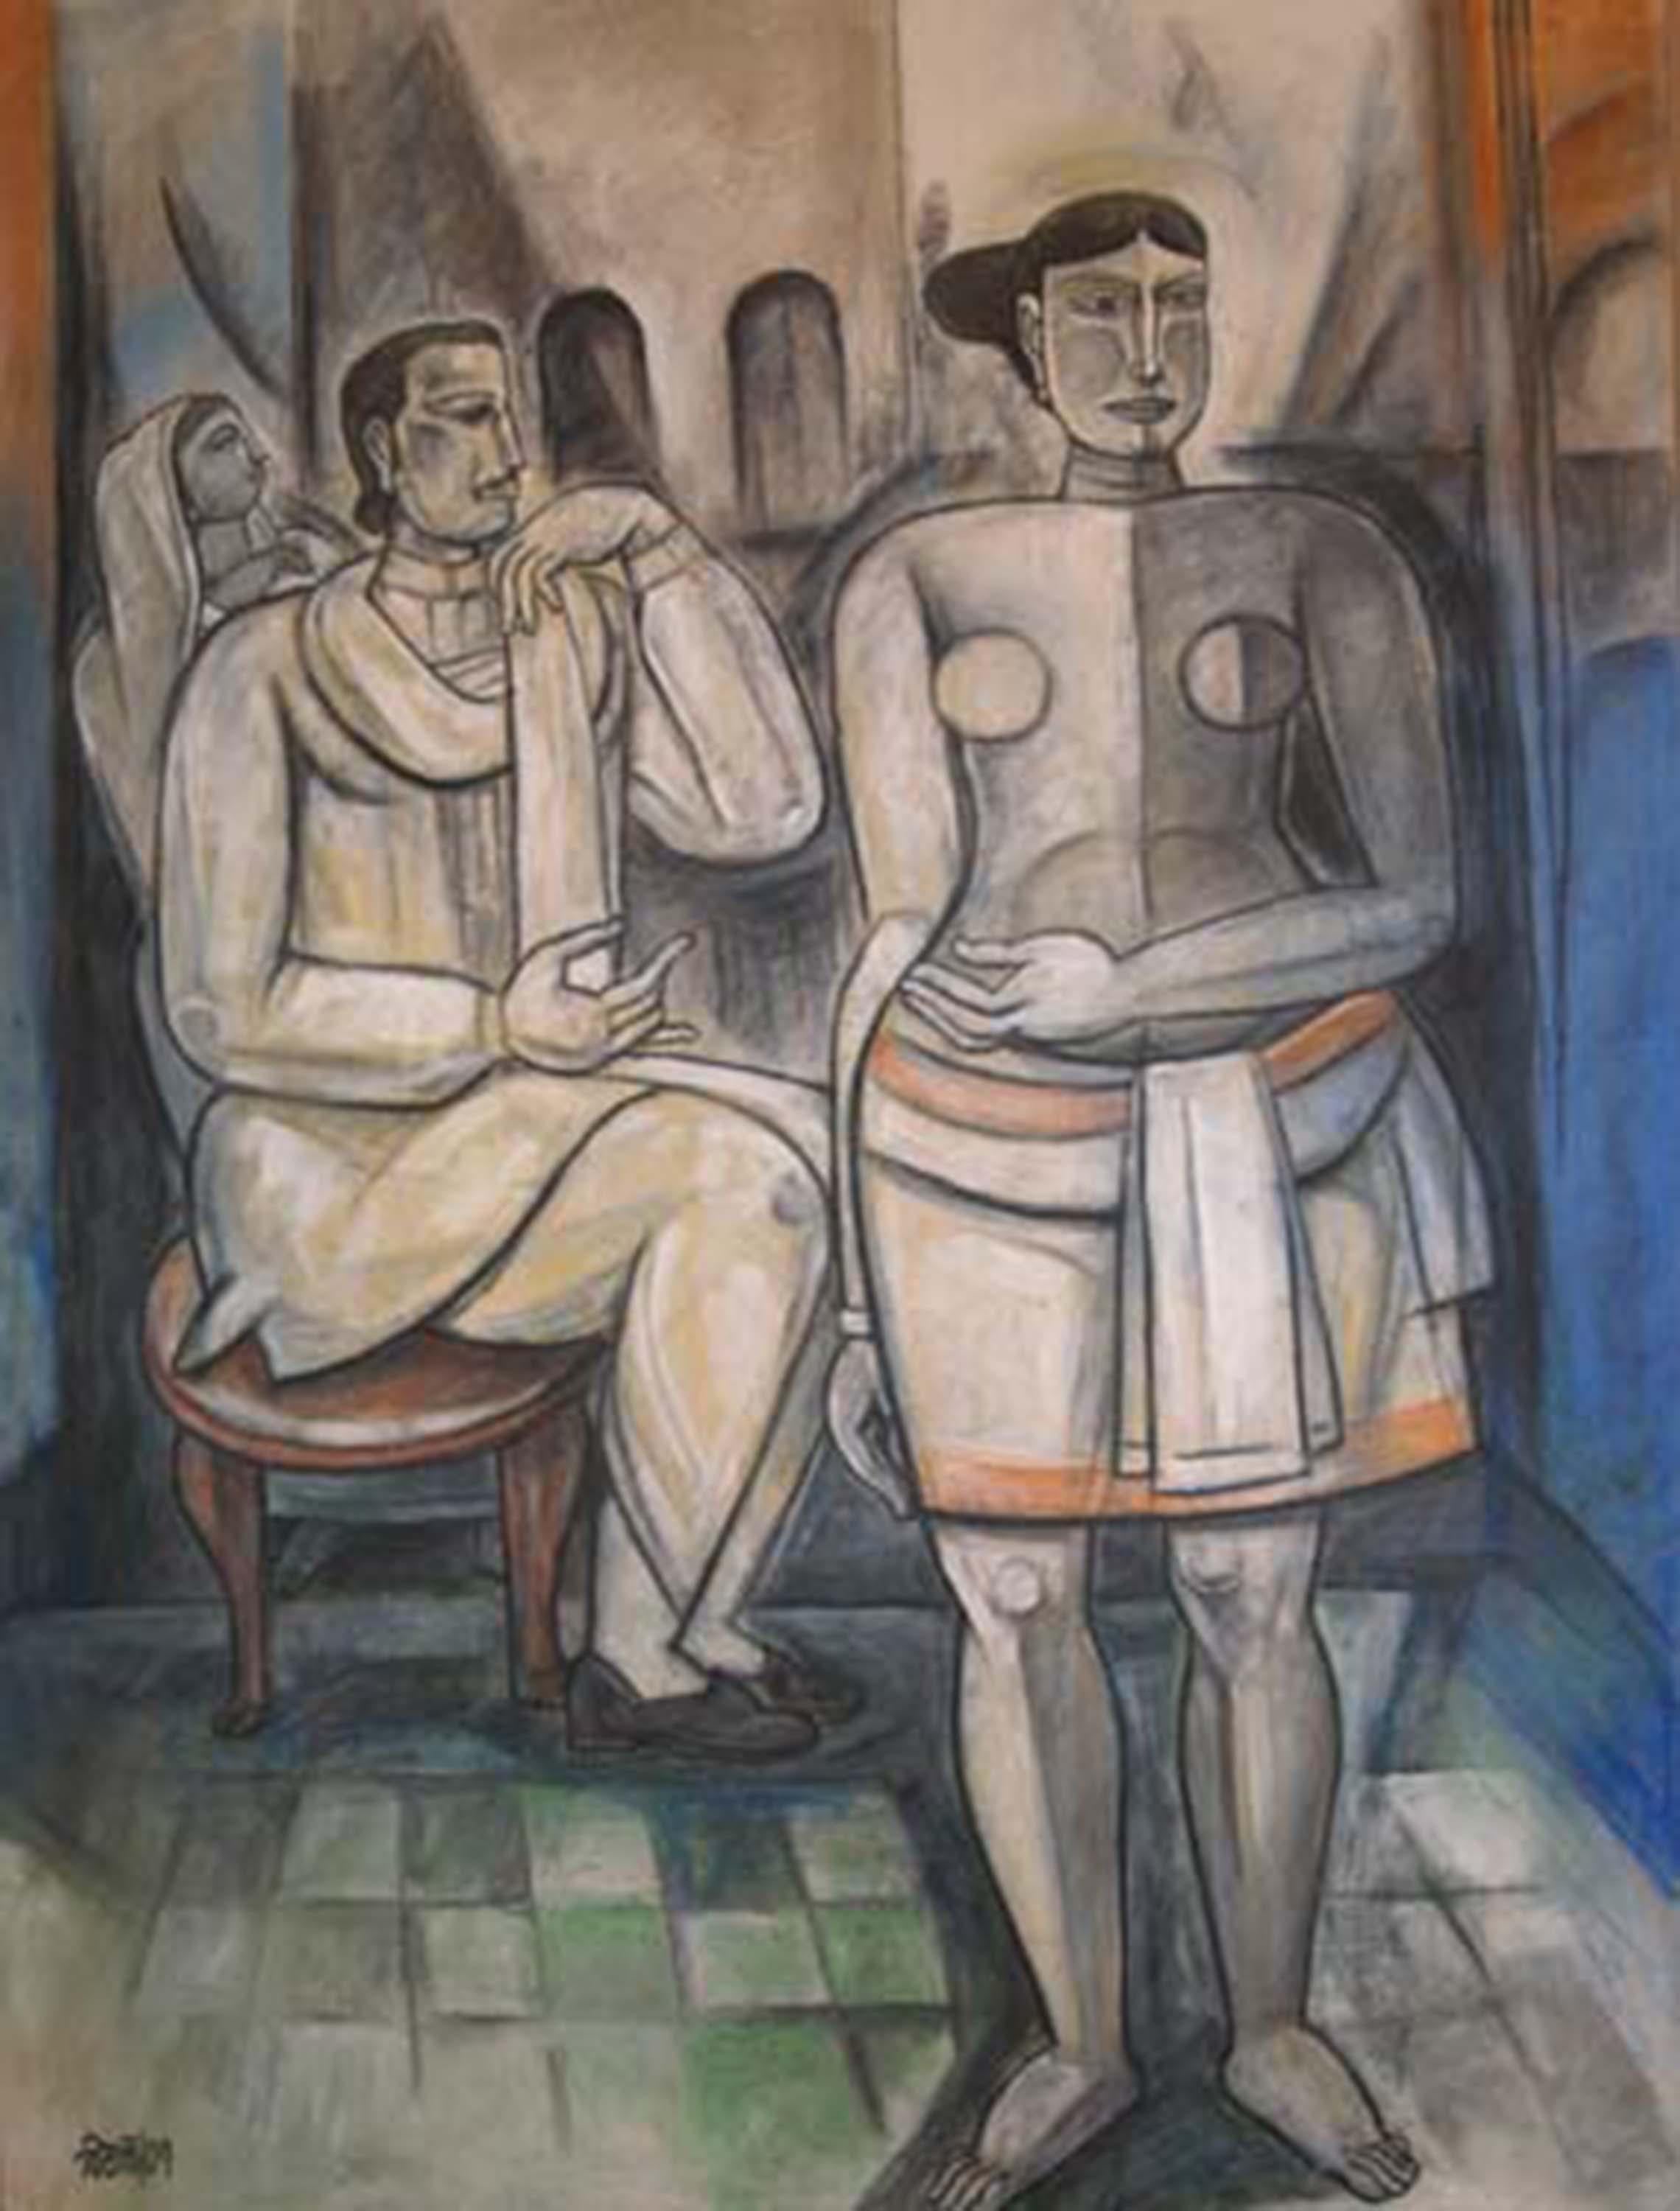 Figurative, Mixed Media on canvas, Blue, White by Modern Indian Artist"In Stock" - Mixed Media Art by Bijan Choudhury